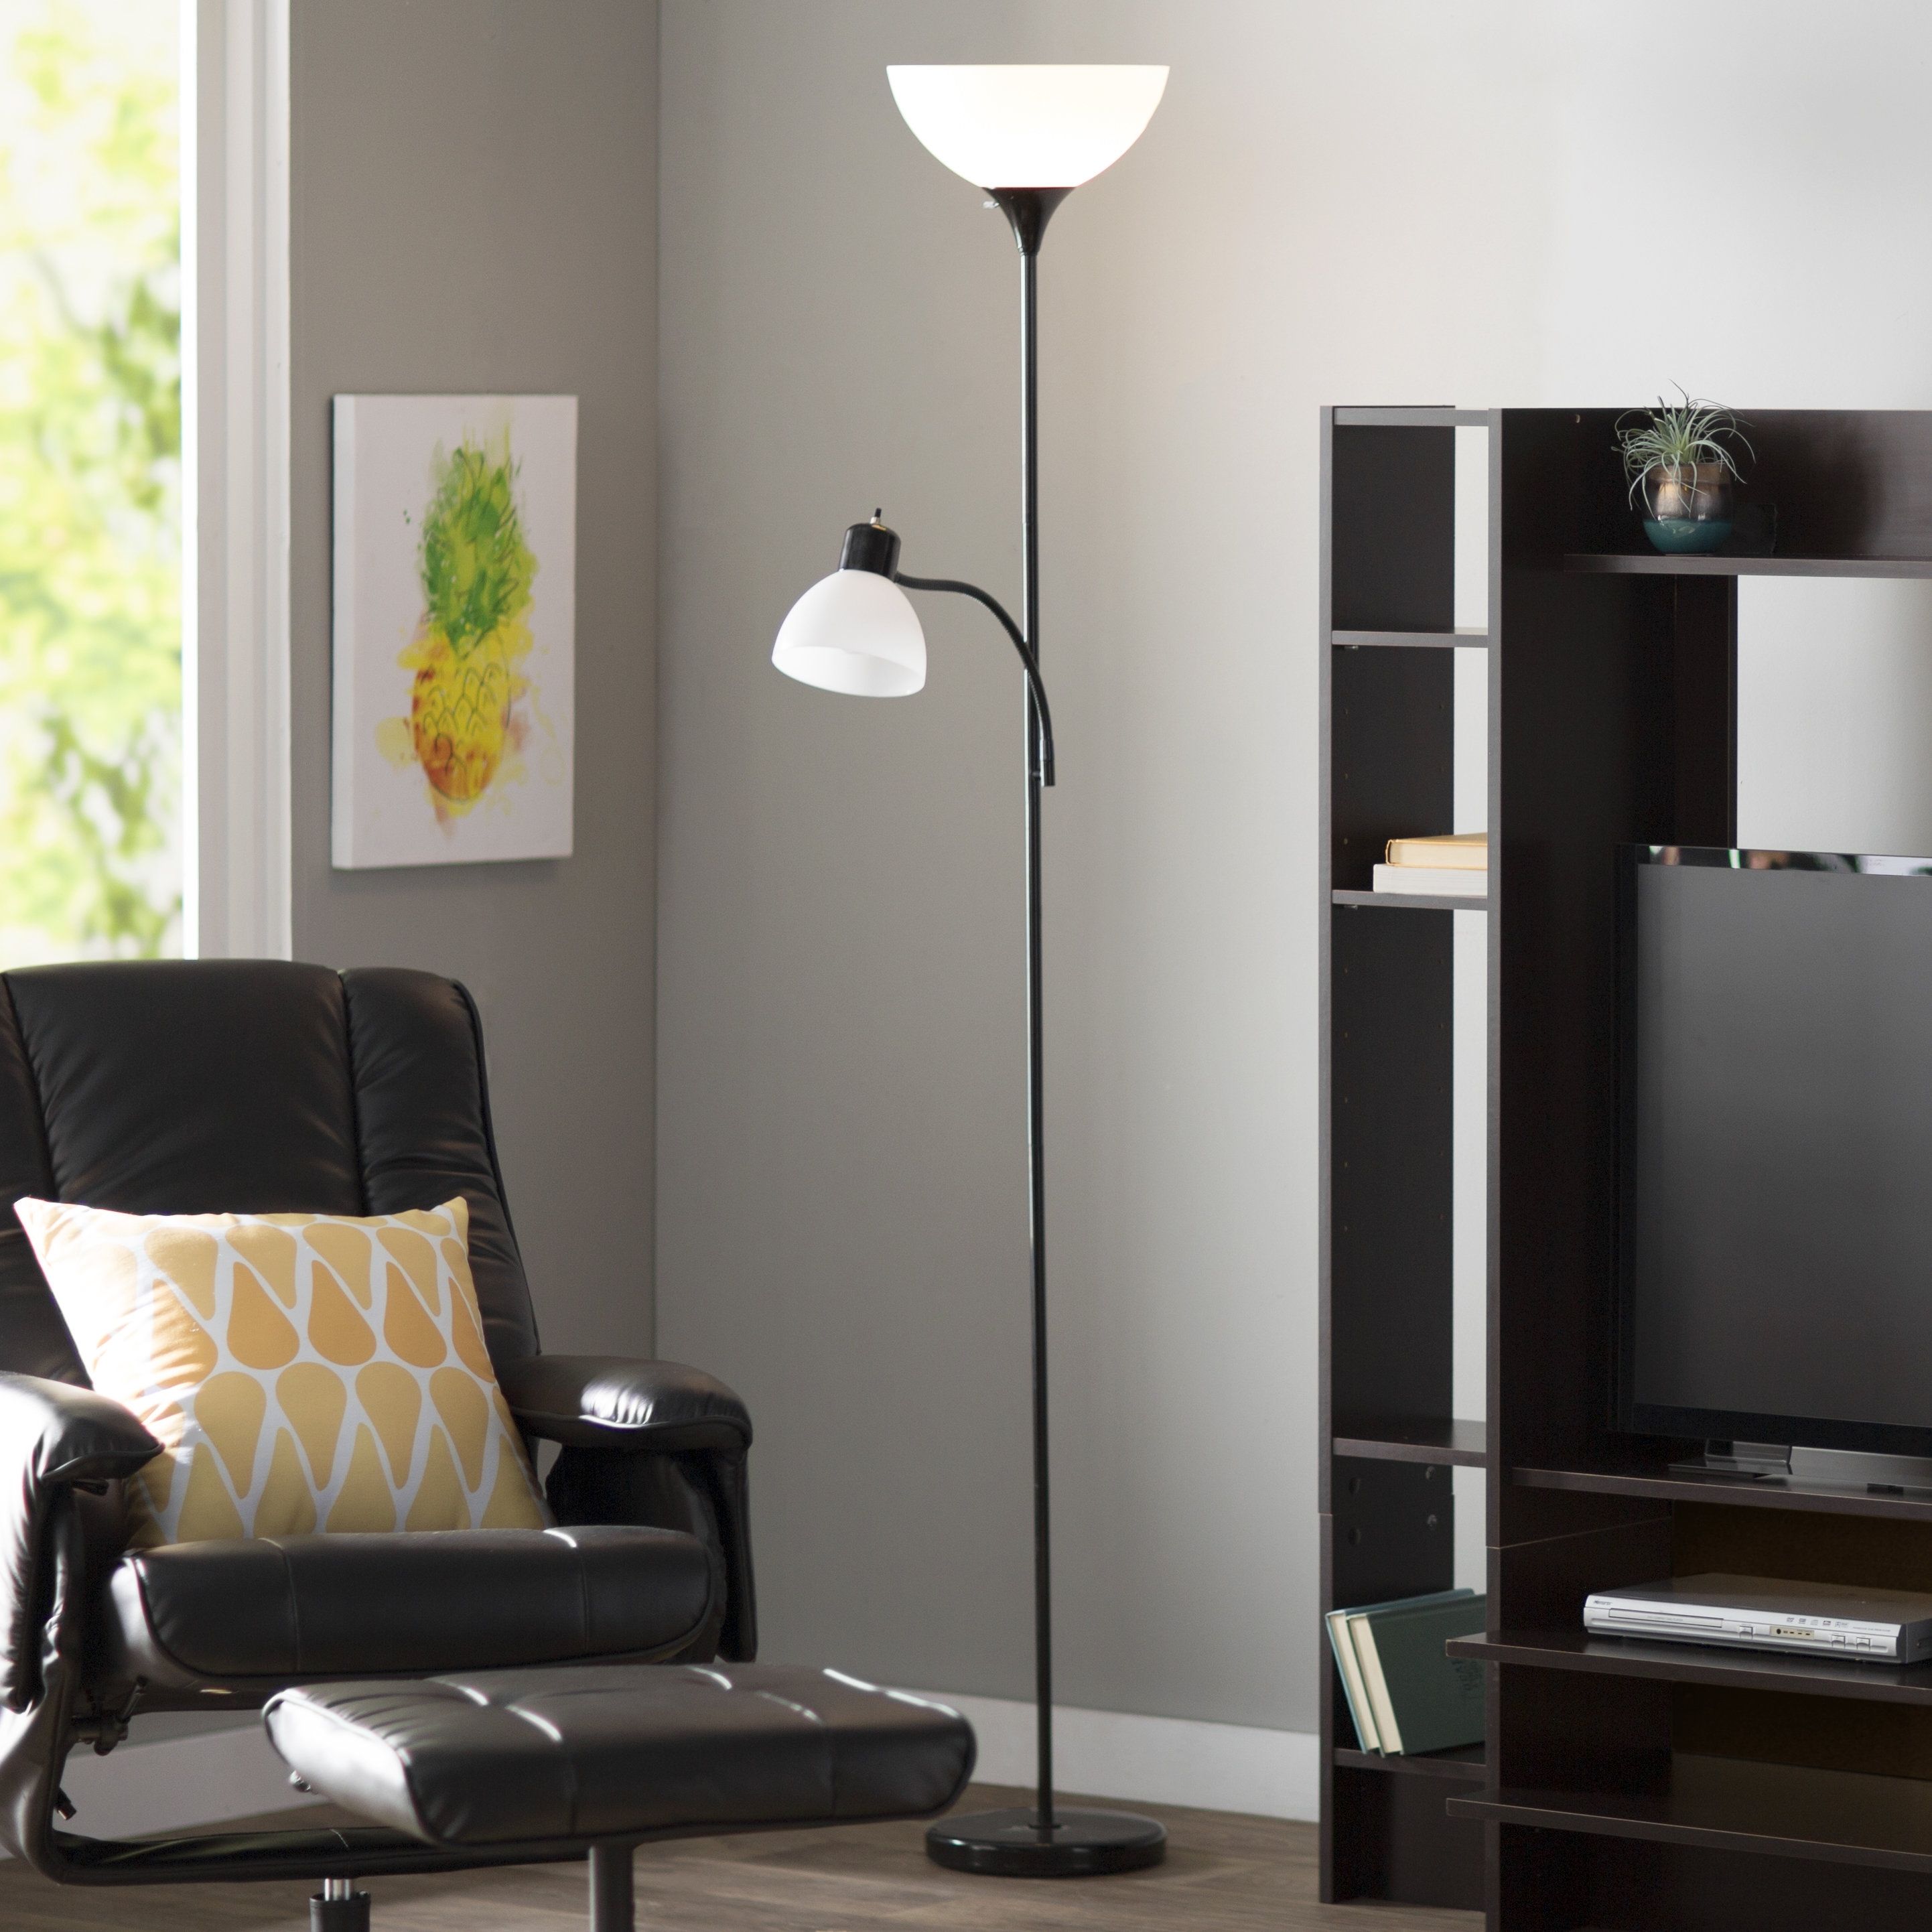 Floor Lamps You'll Love | Wayfair In Modern Living Room Table Lamps (View 3 of 15)